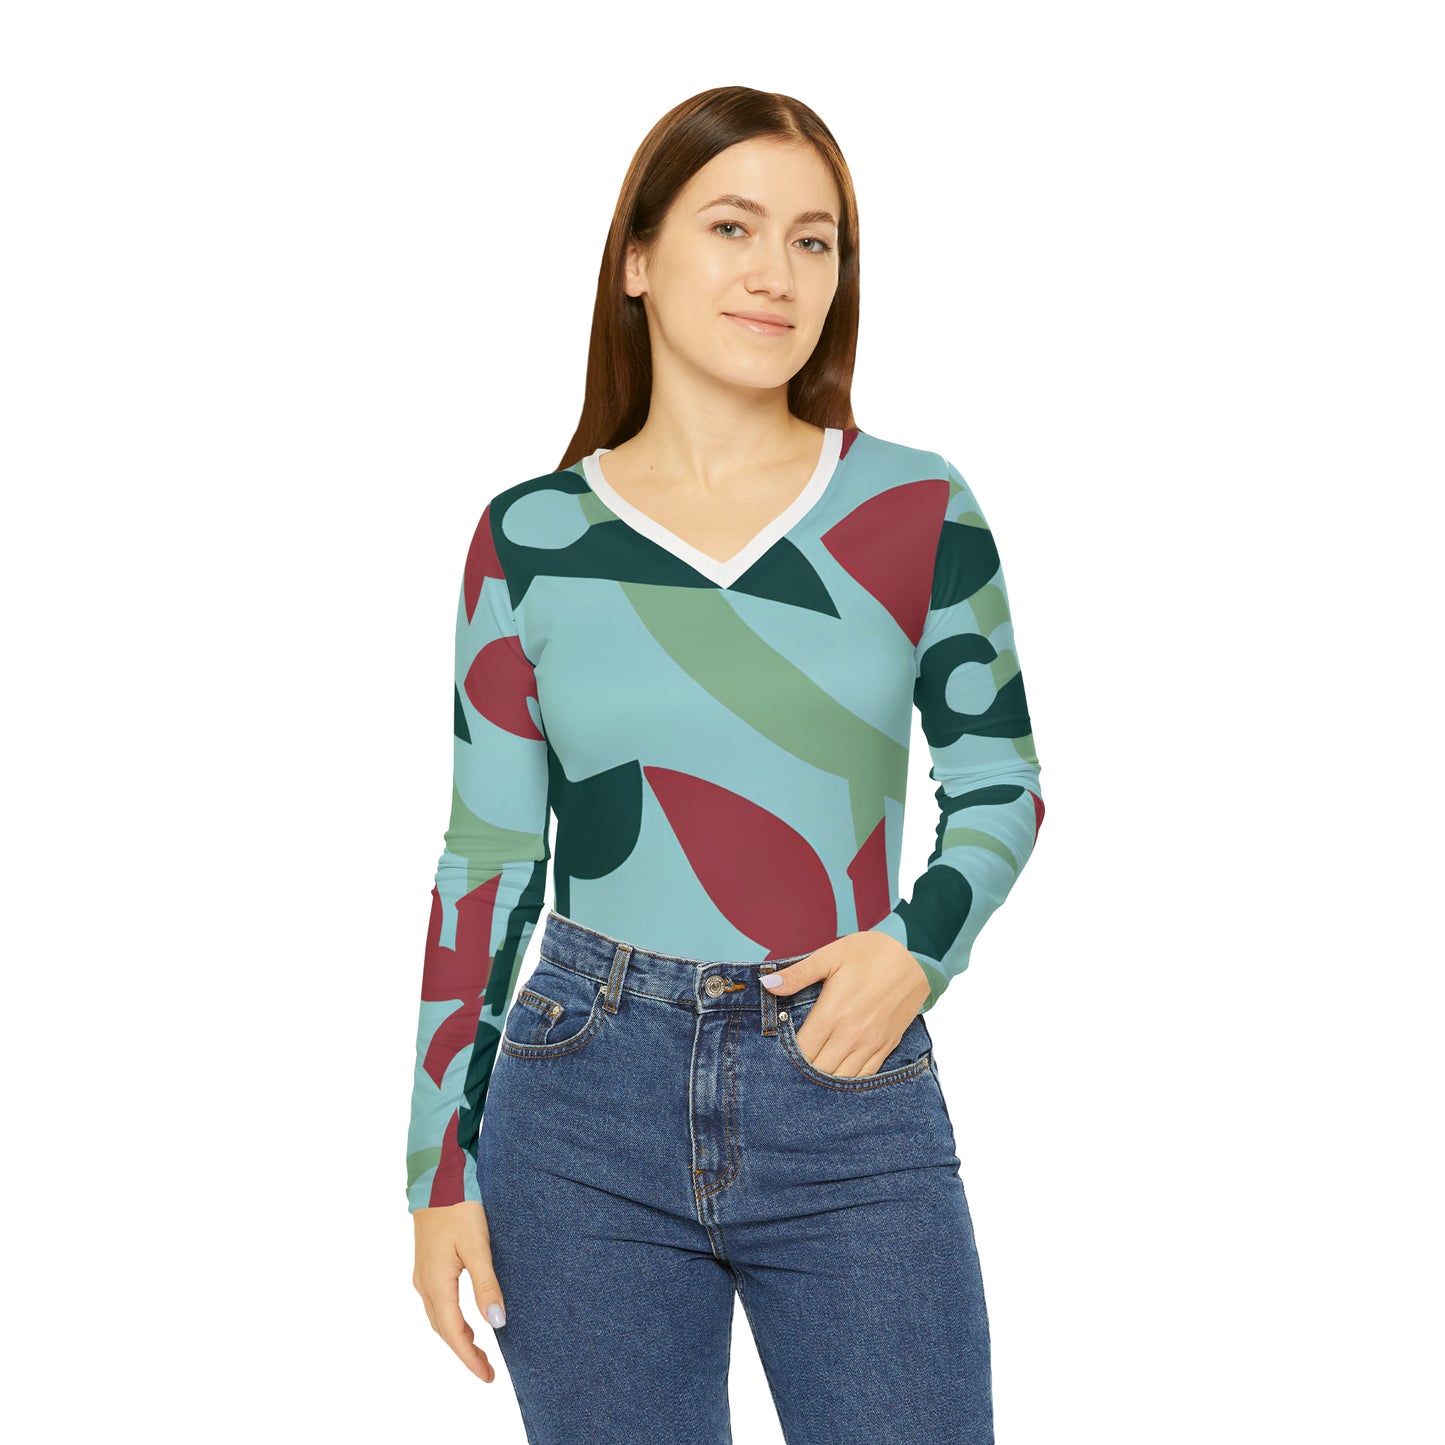 Chaparral Ione - Women's Long-Sleeve V-neck Shirt